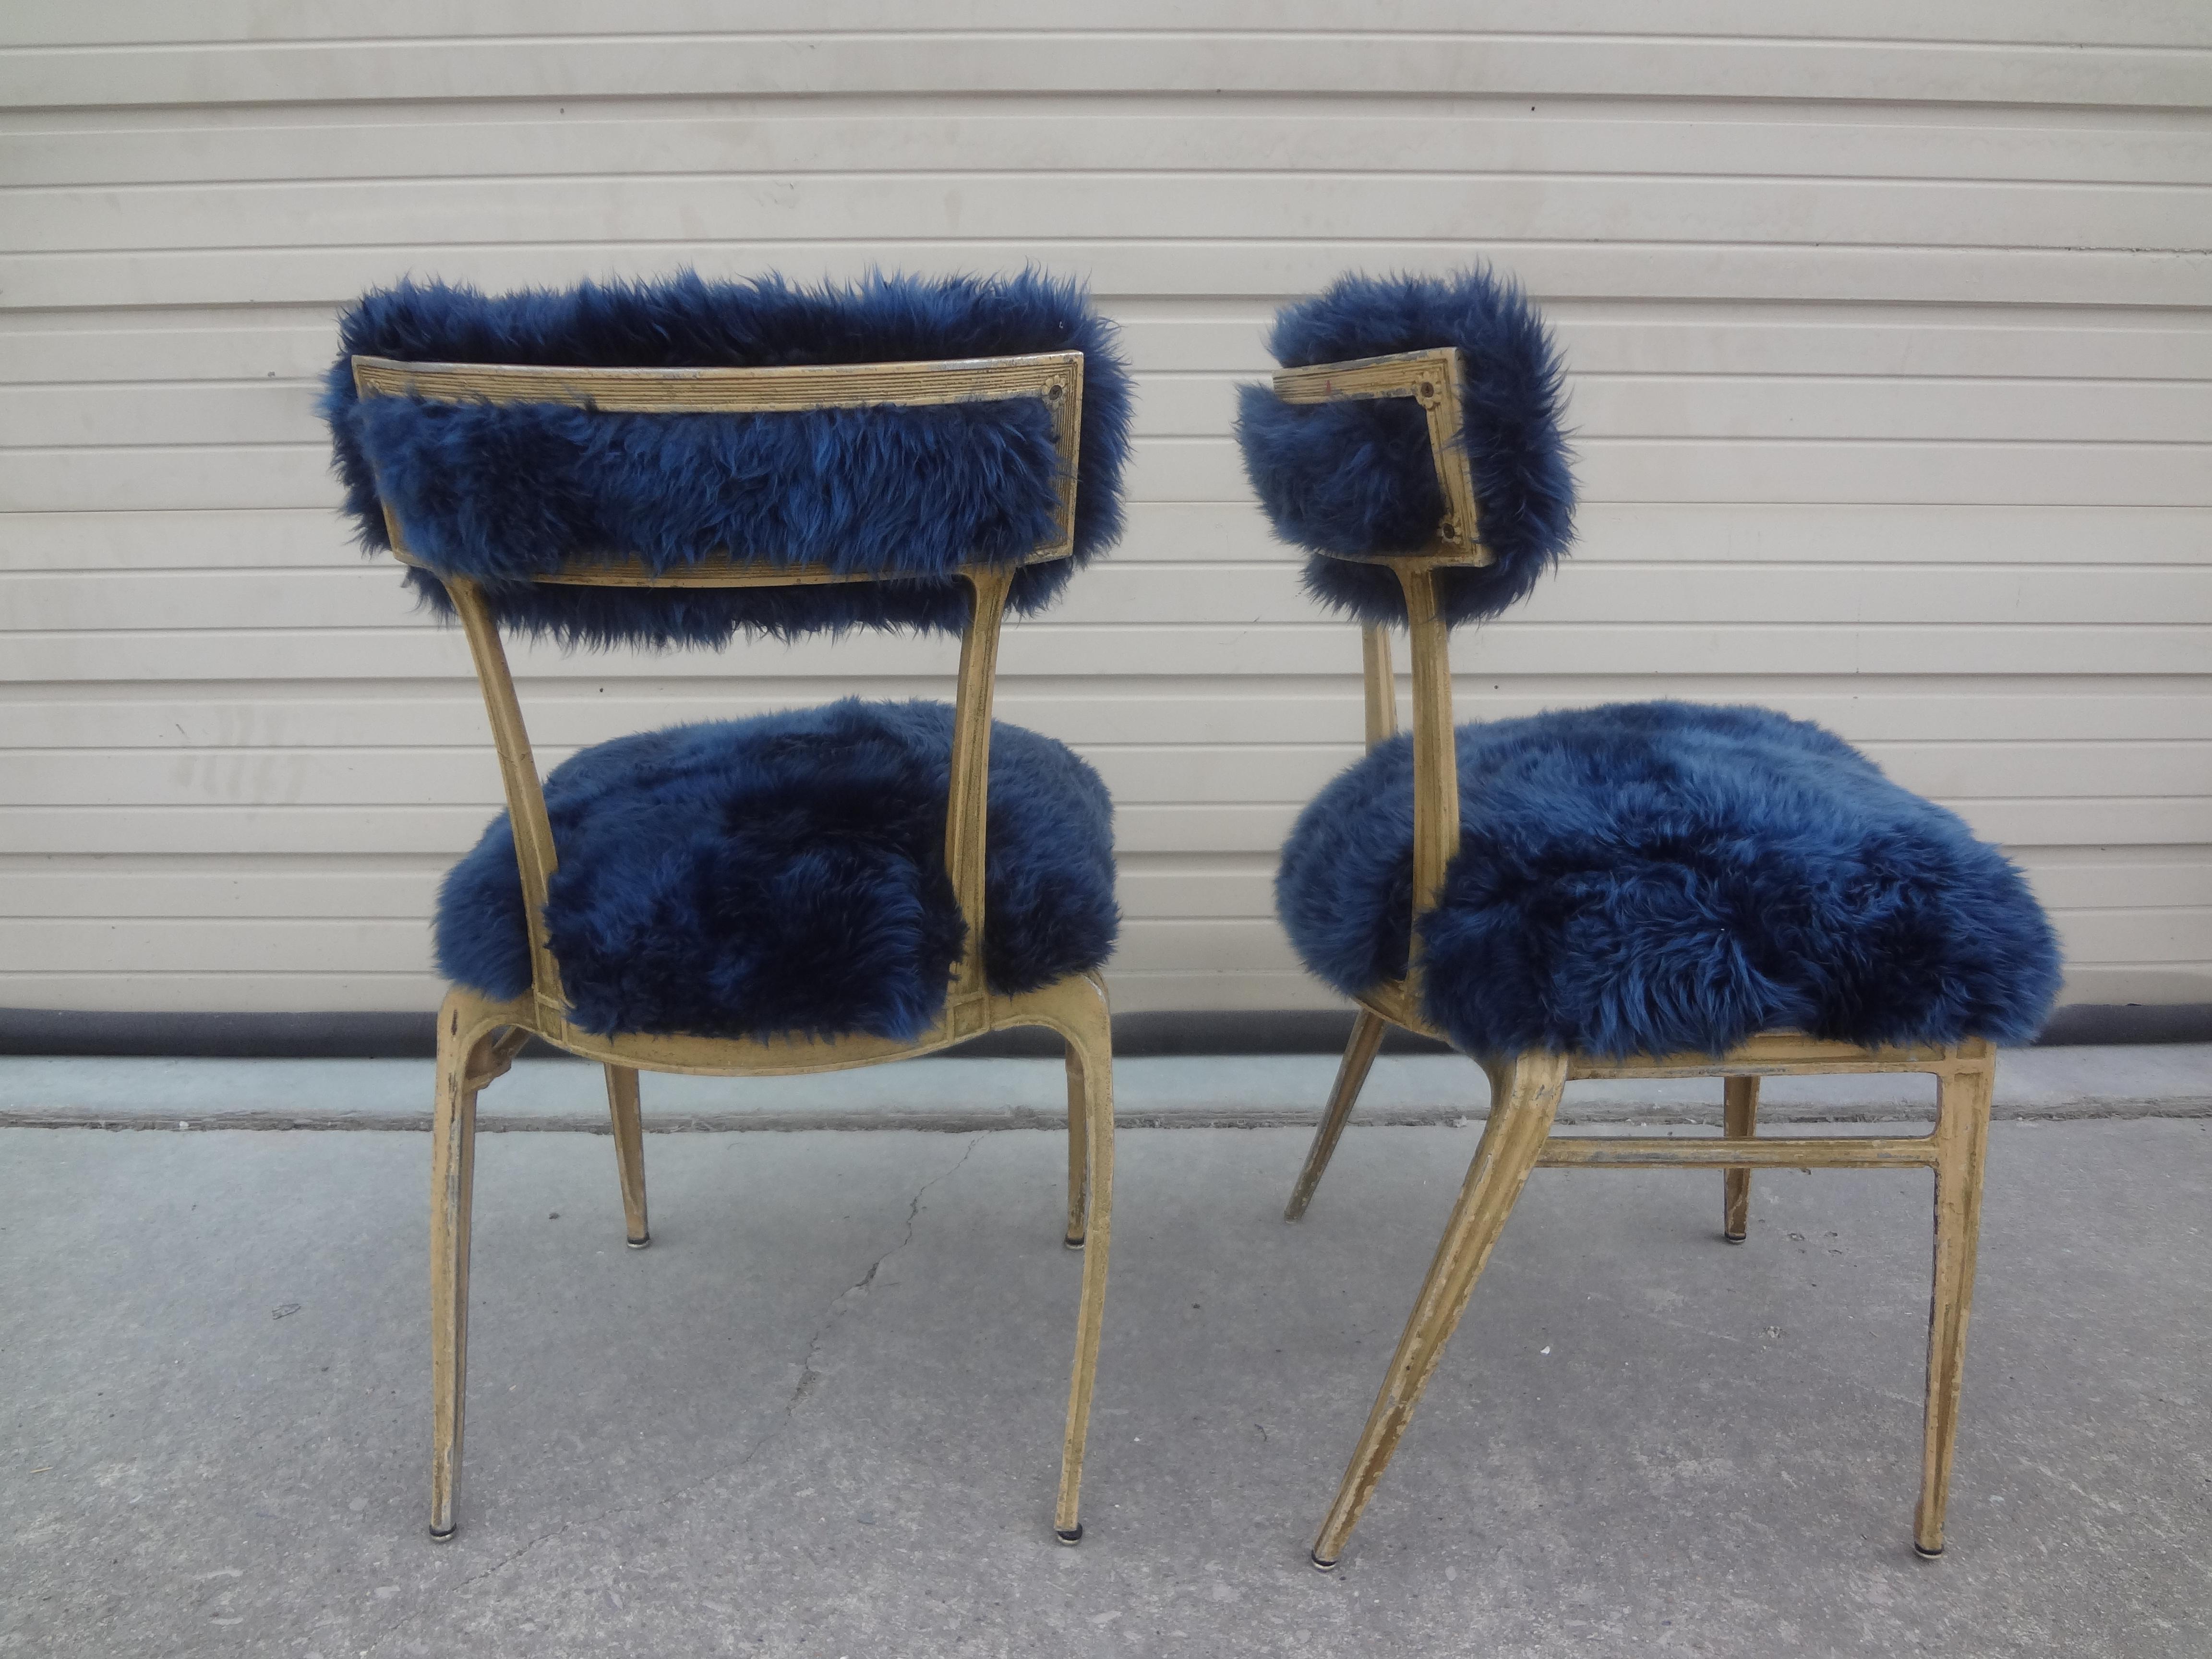 Pair of French Modern Jean Prouvé Style Metal Chairs Upholstered in Sheepskin 1